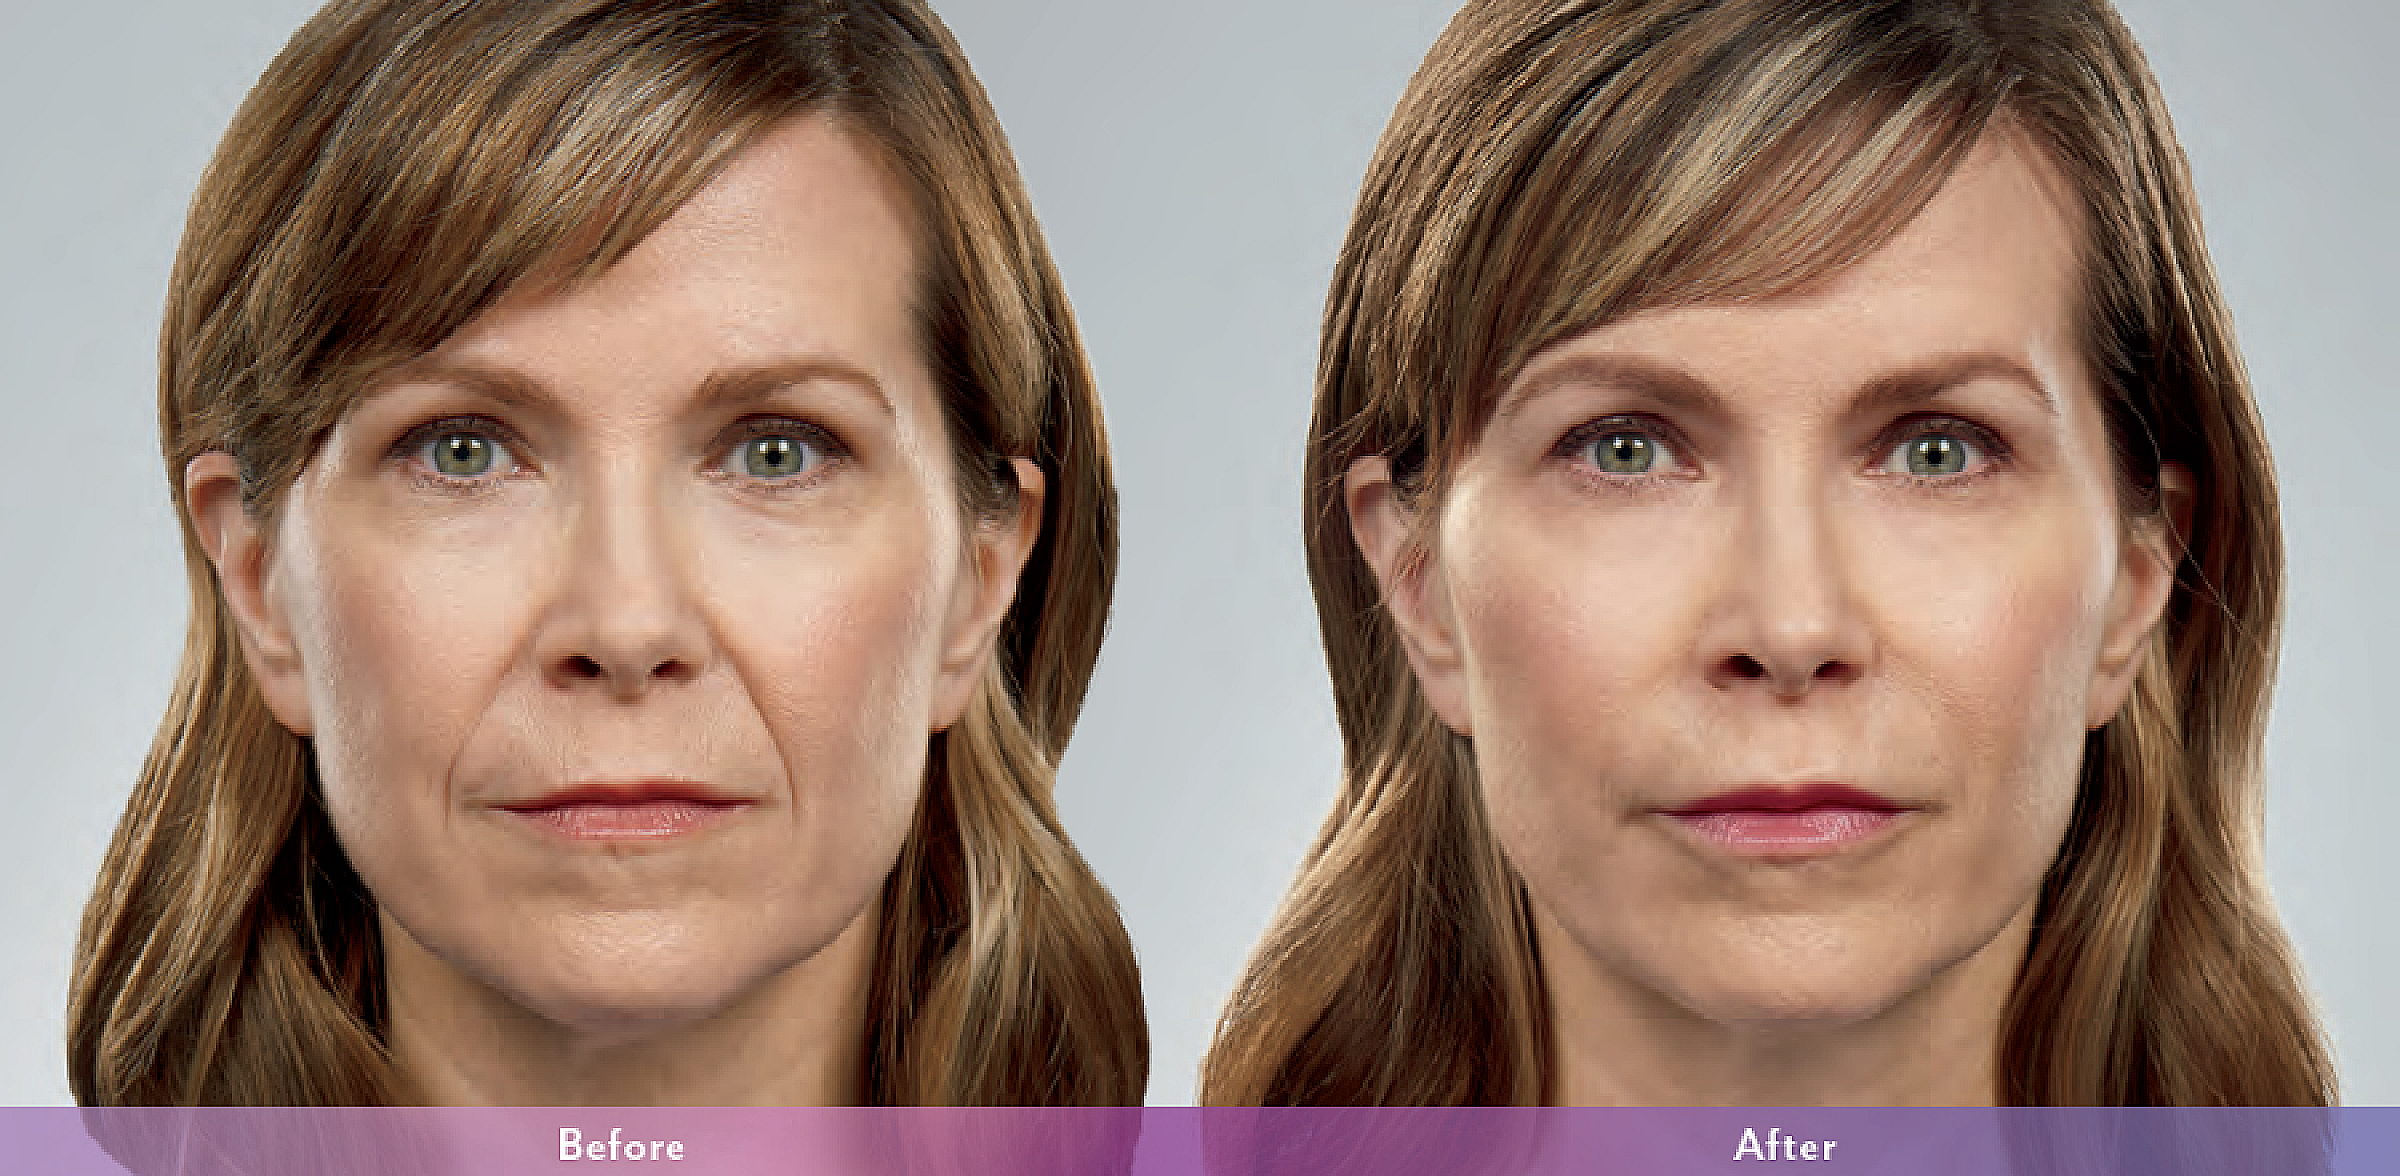 Before and after results from liquid facelifts